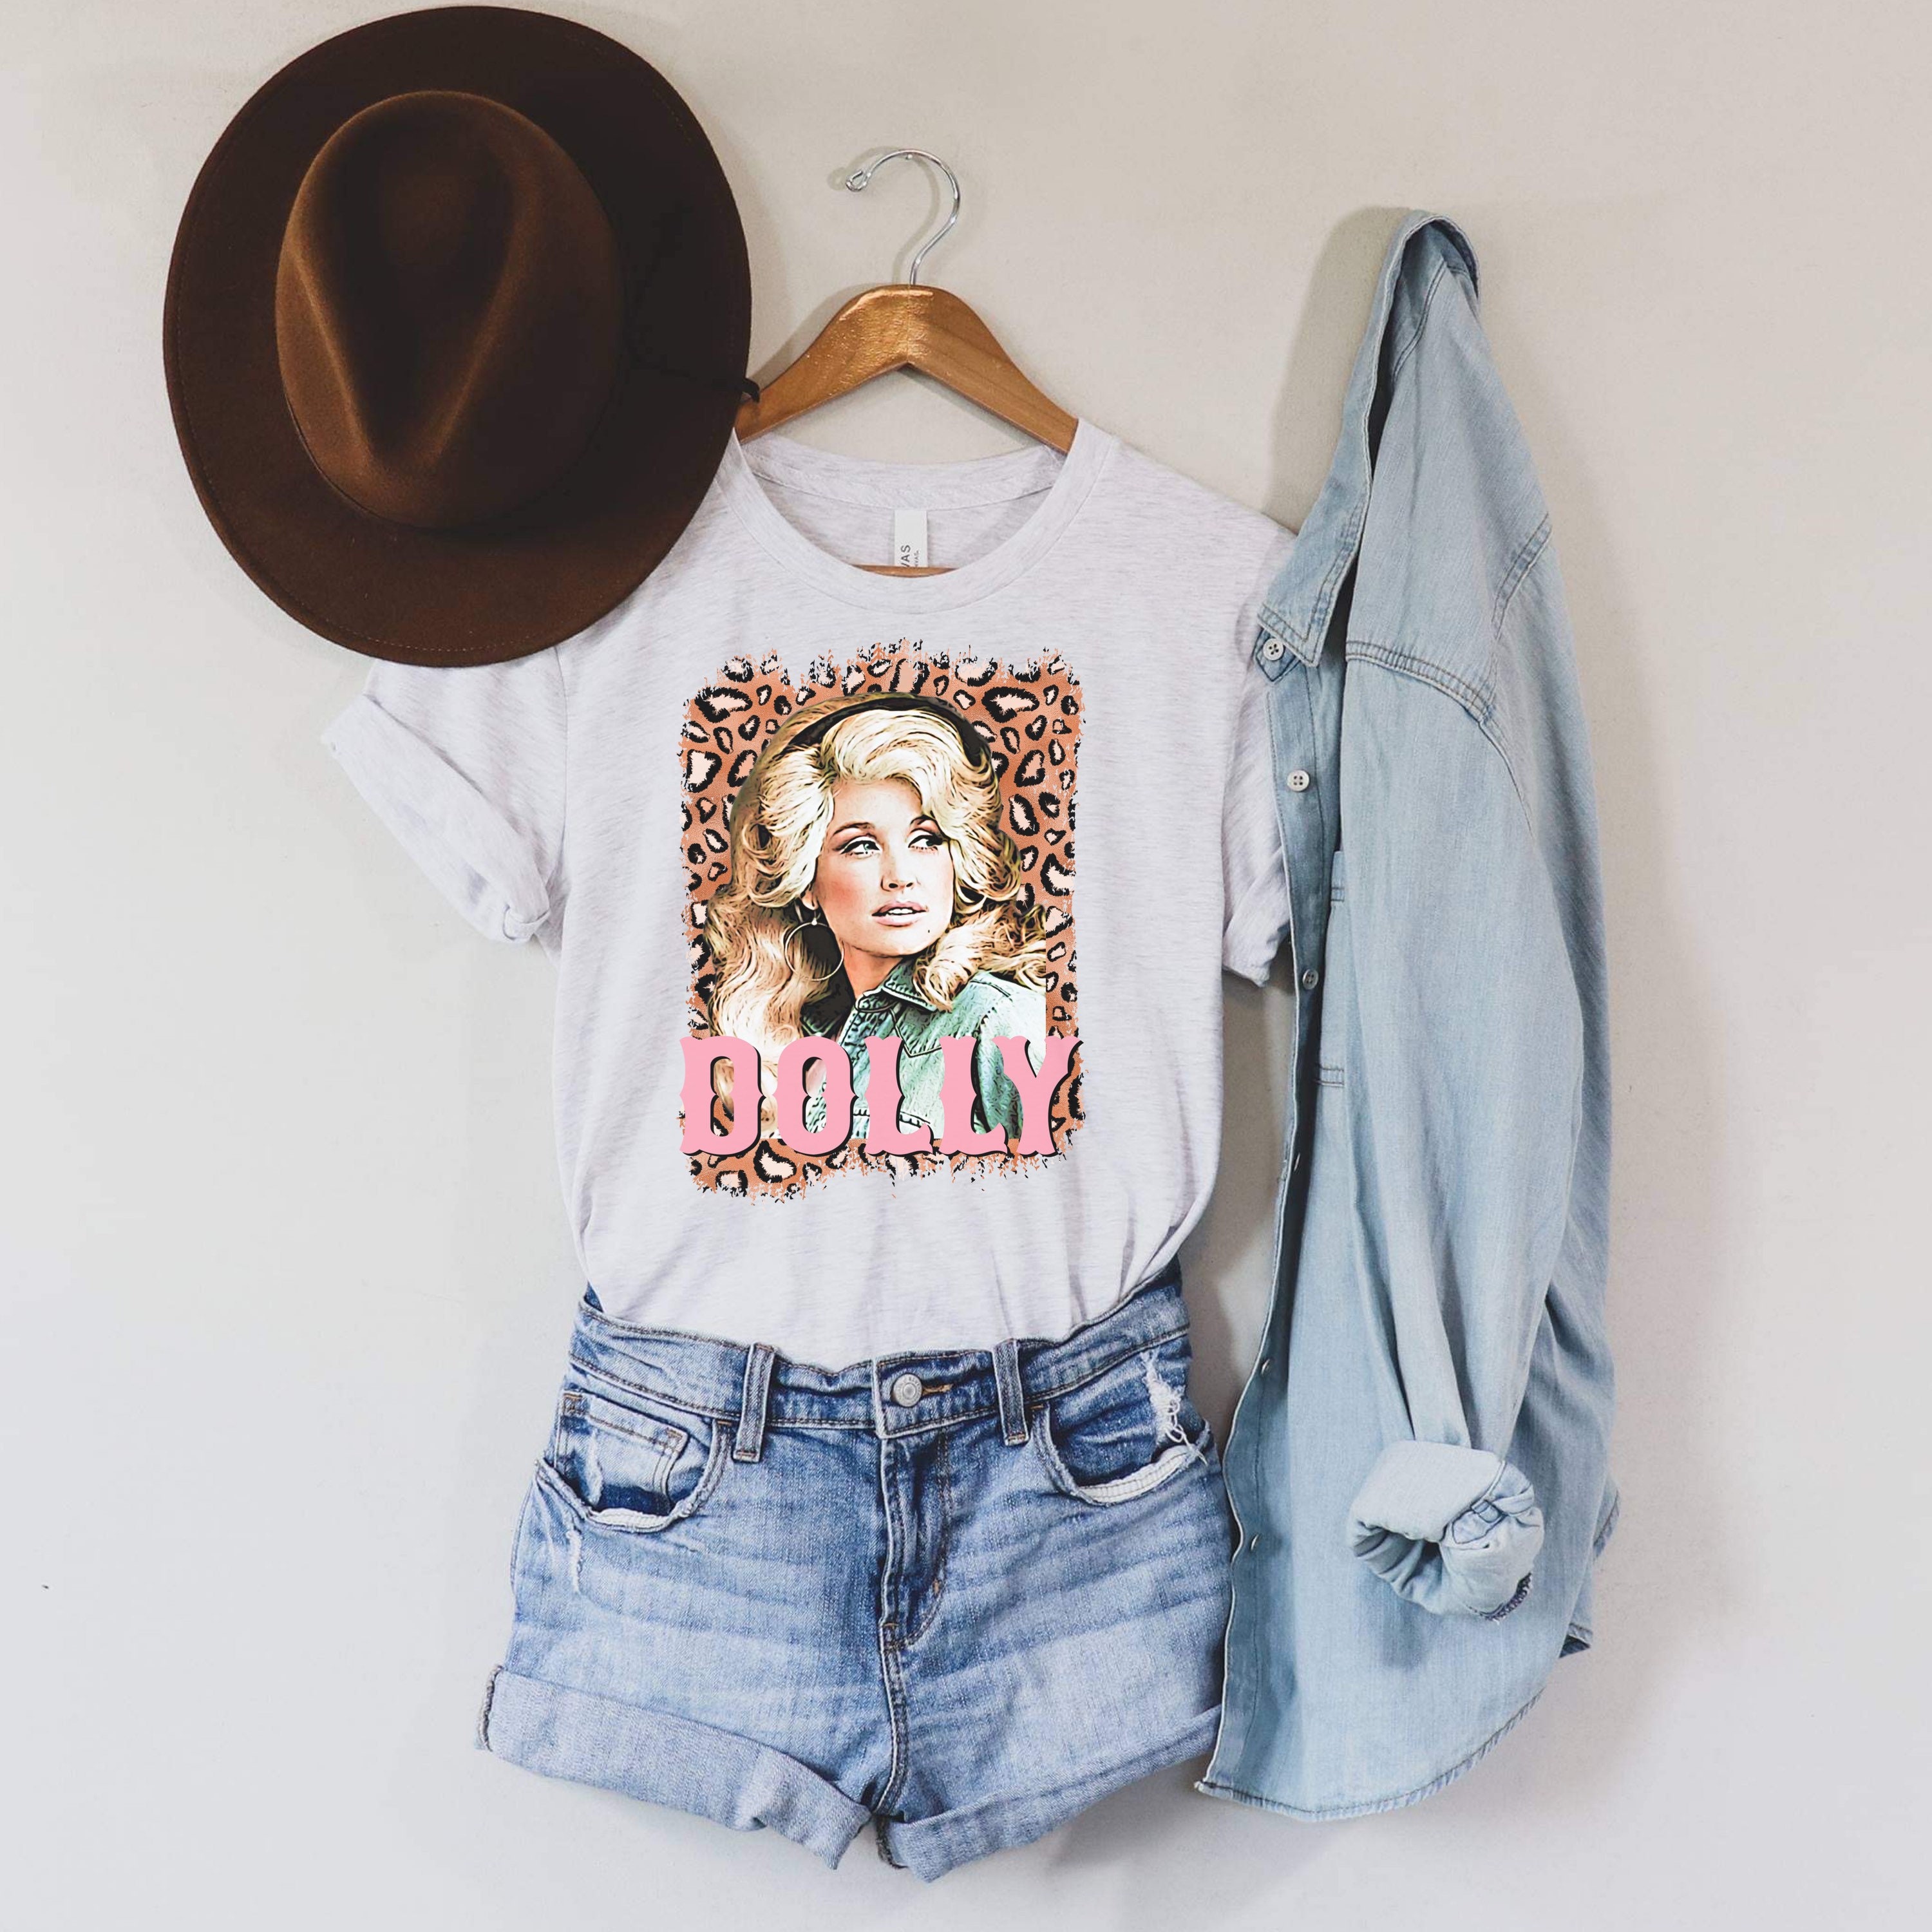 Dolly Parton Inspired Graphic Tee Shirt